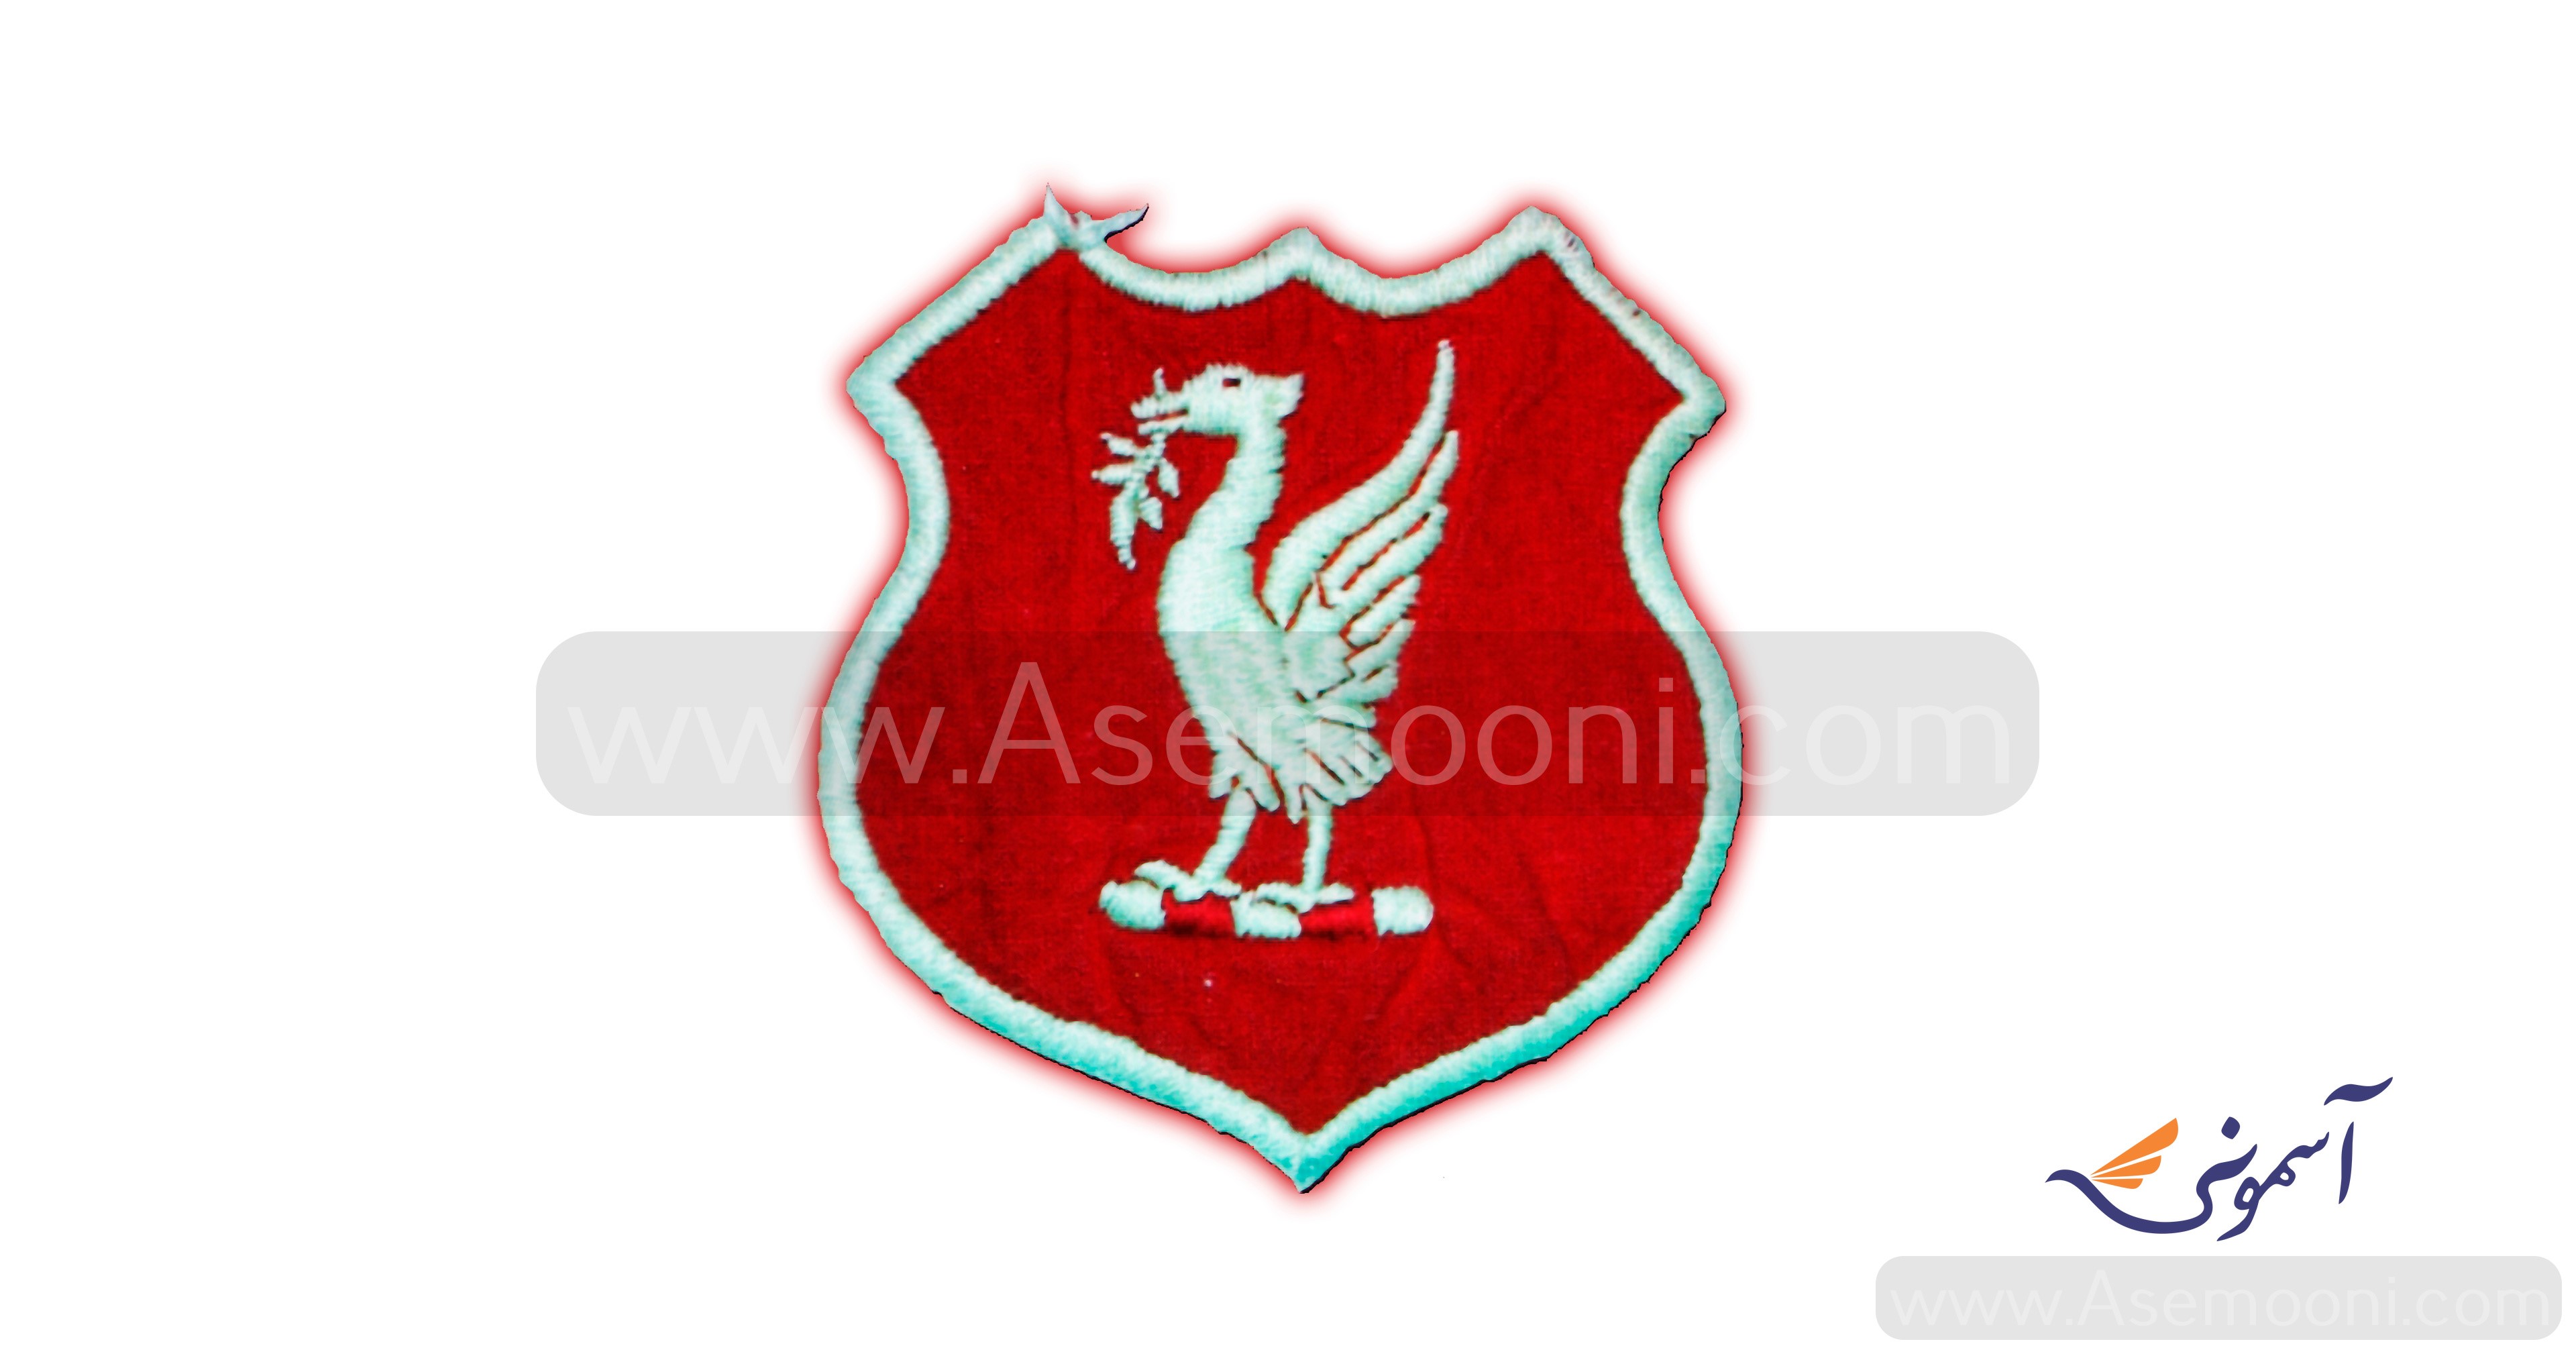 liverpool-logo-during-time